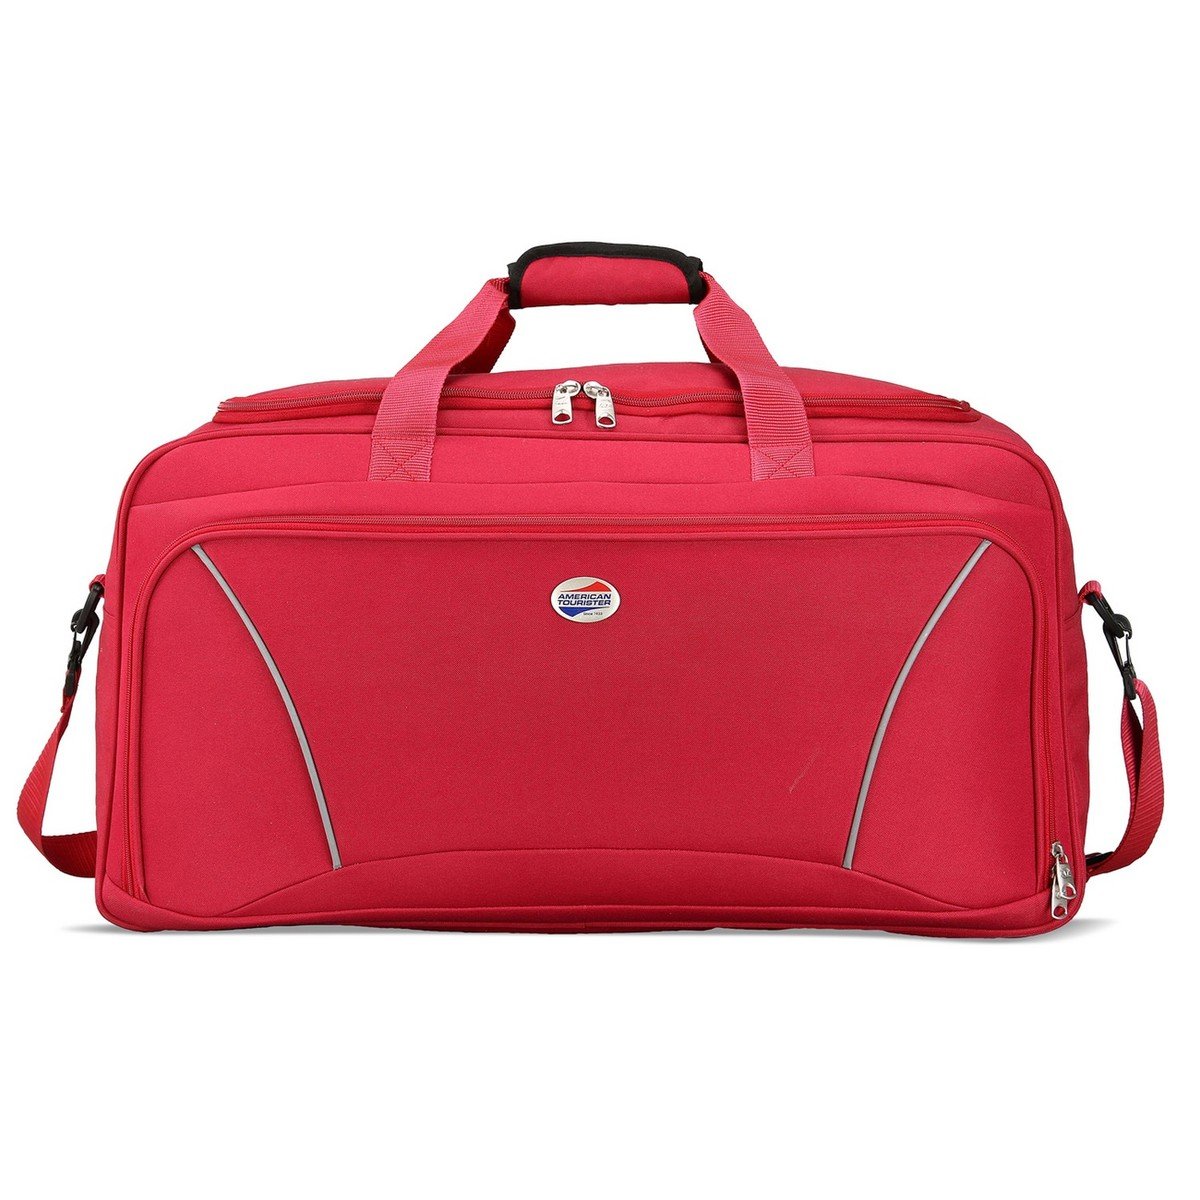 American Tourister Vision Duffle Bag, 57 cm, Y65